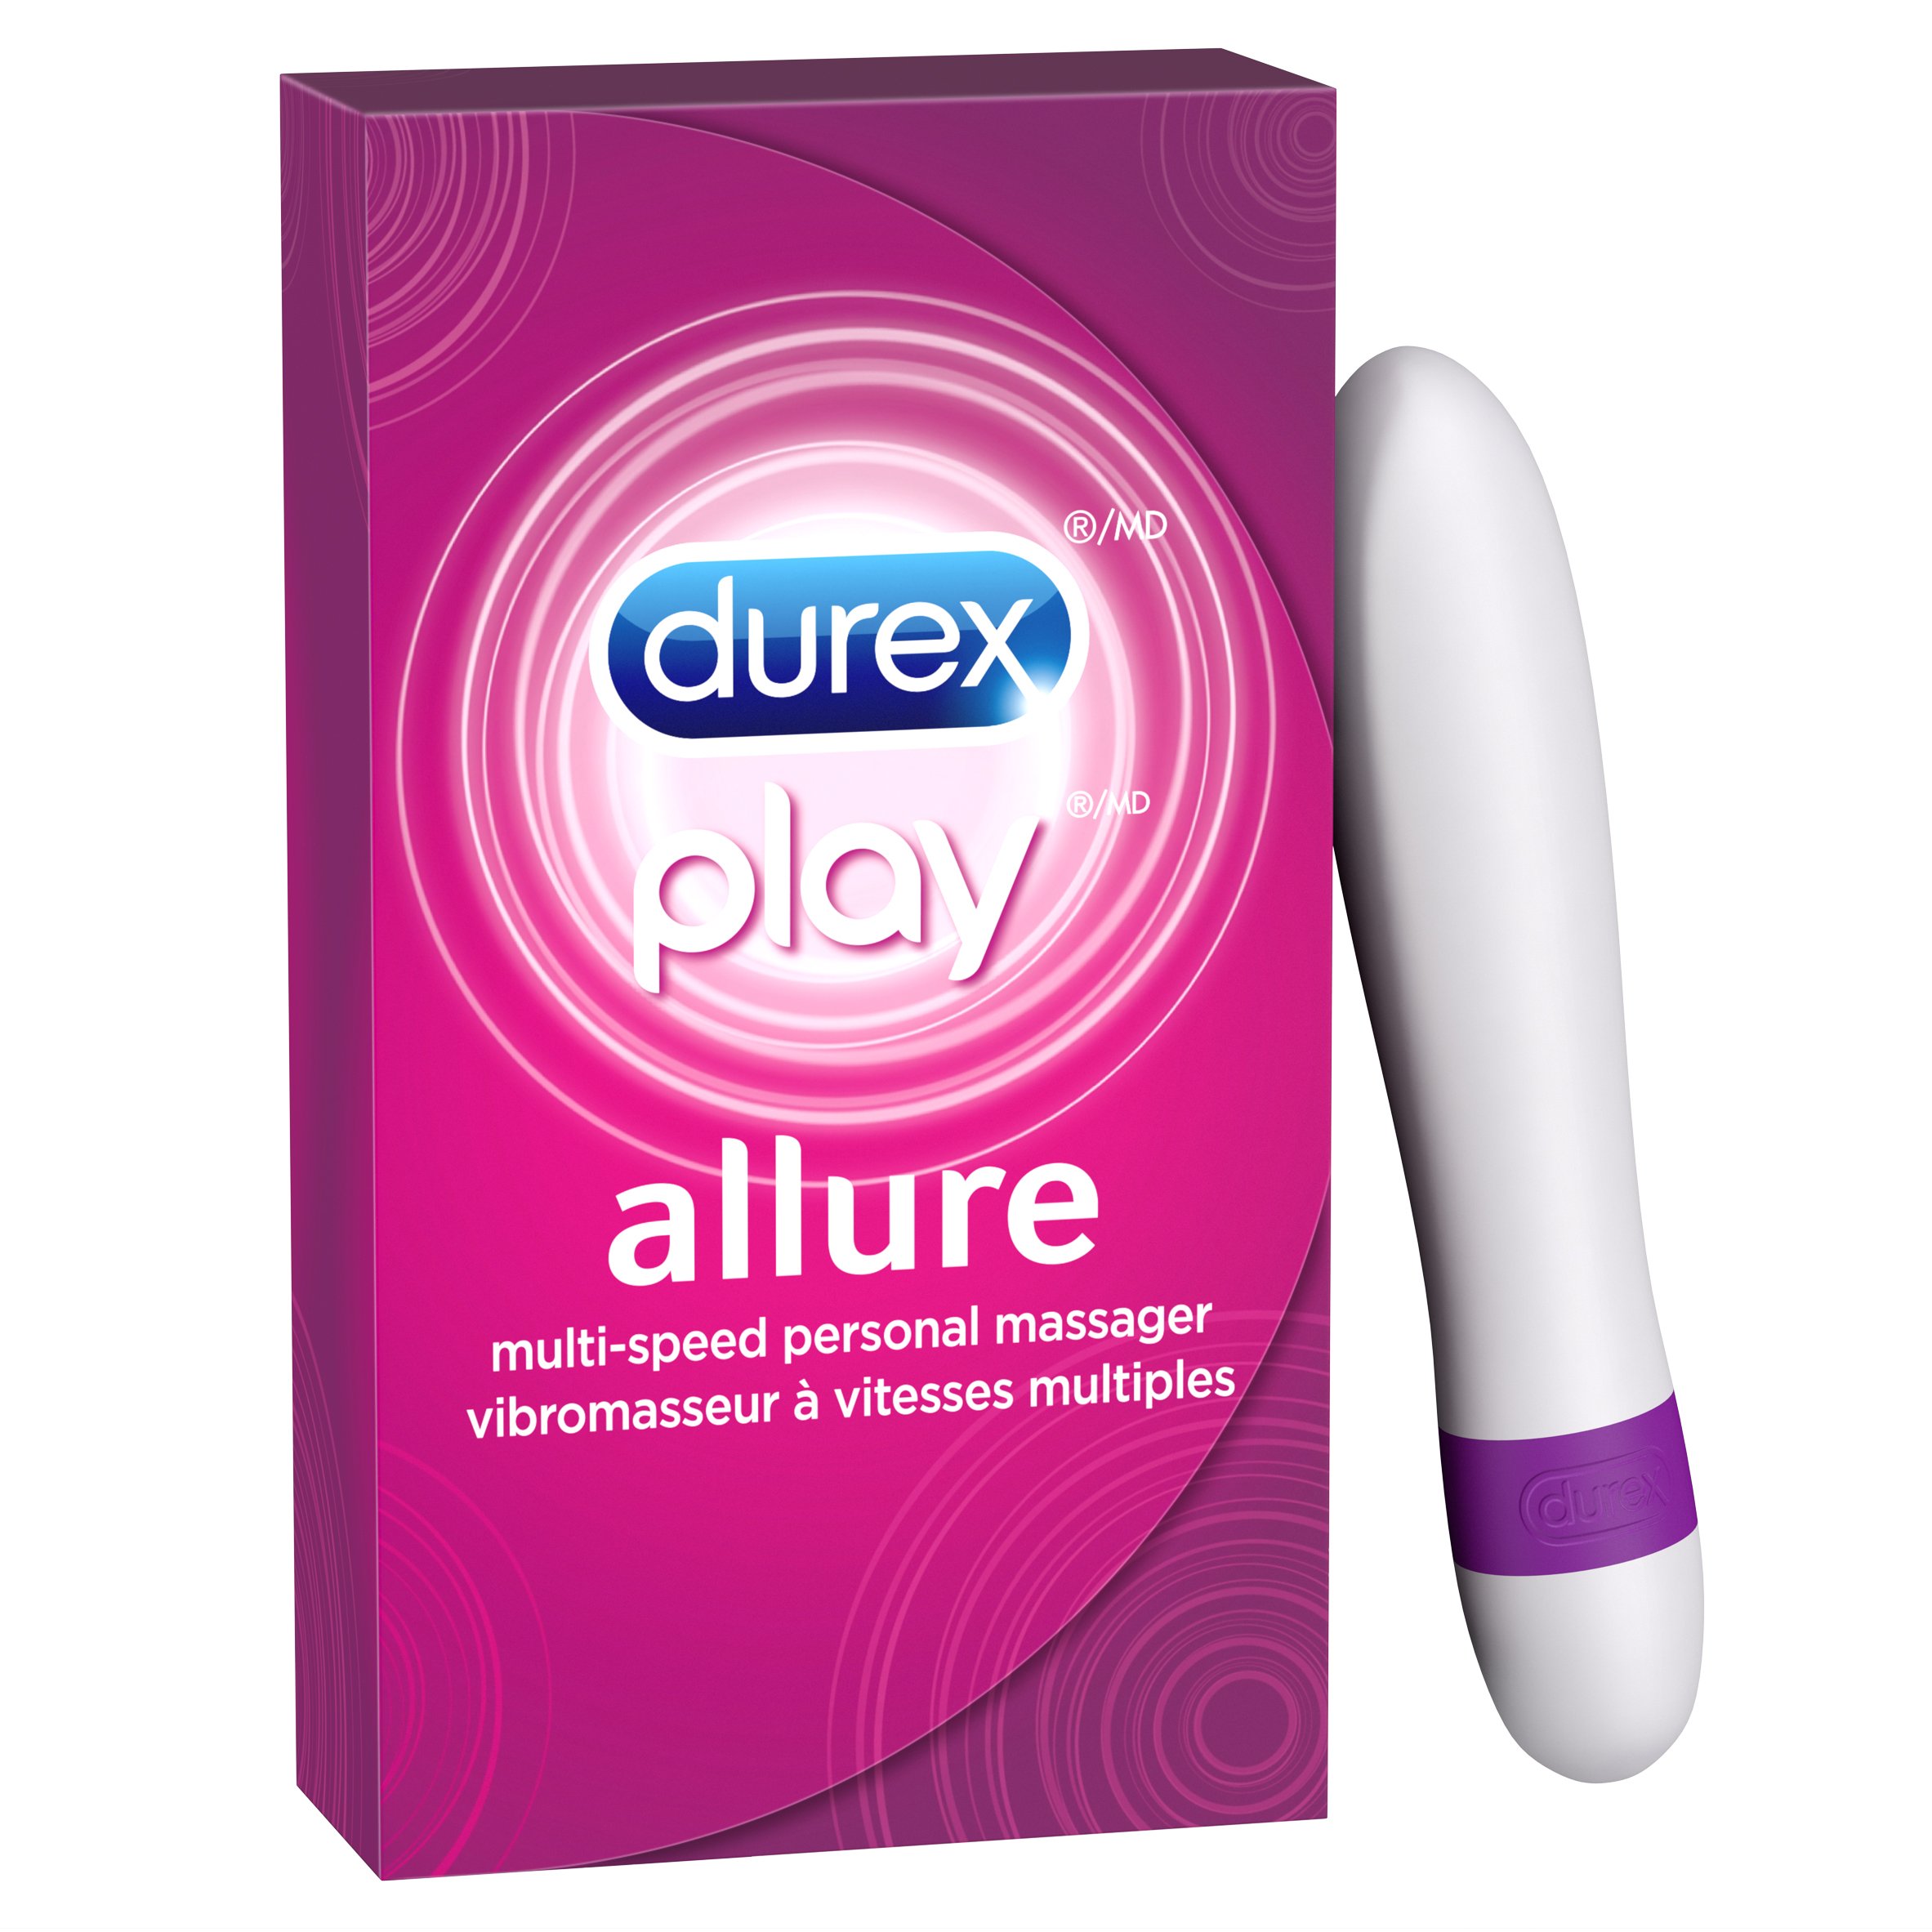 dillon obrien share play allure personal massager photos